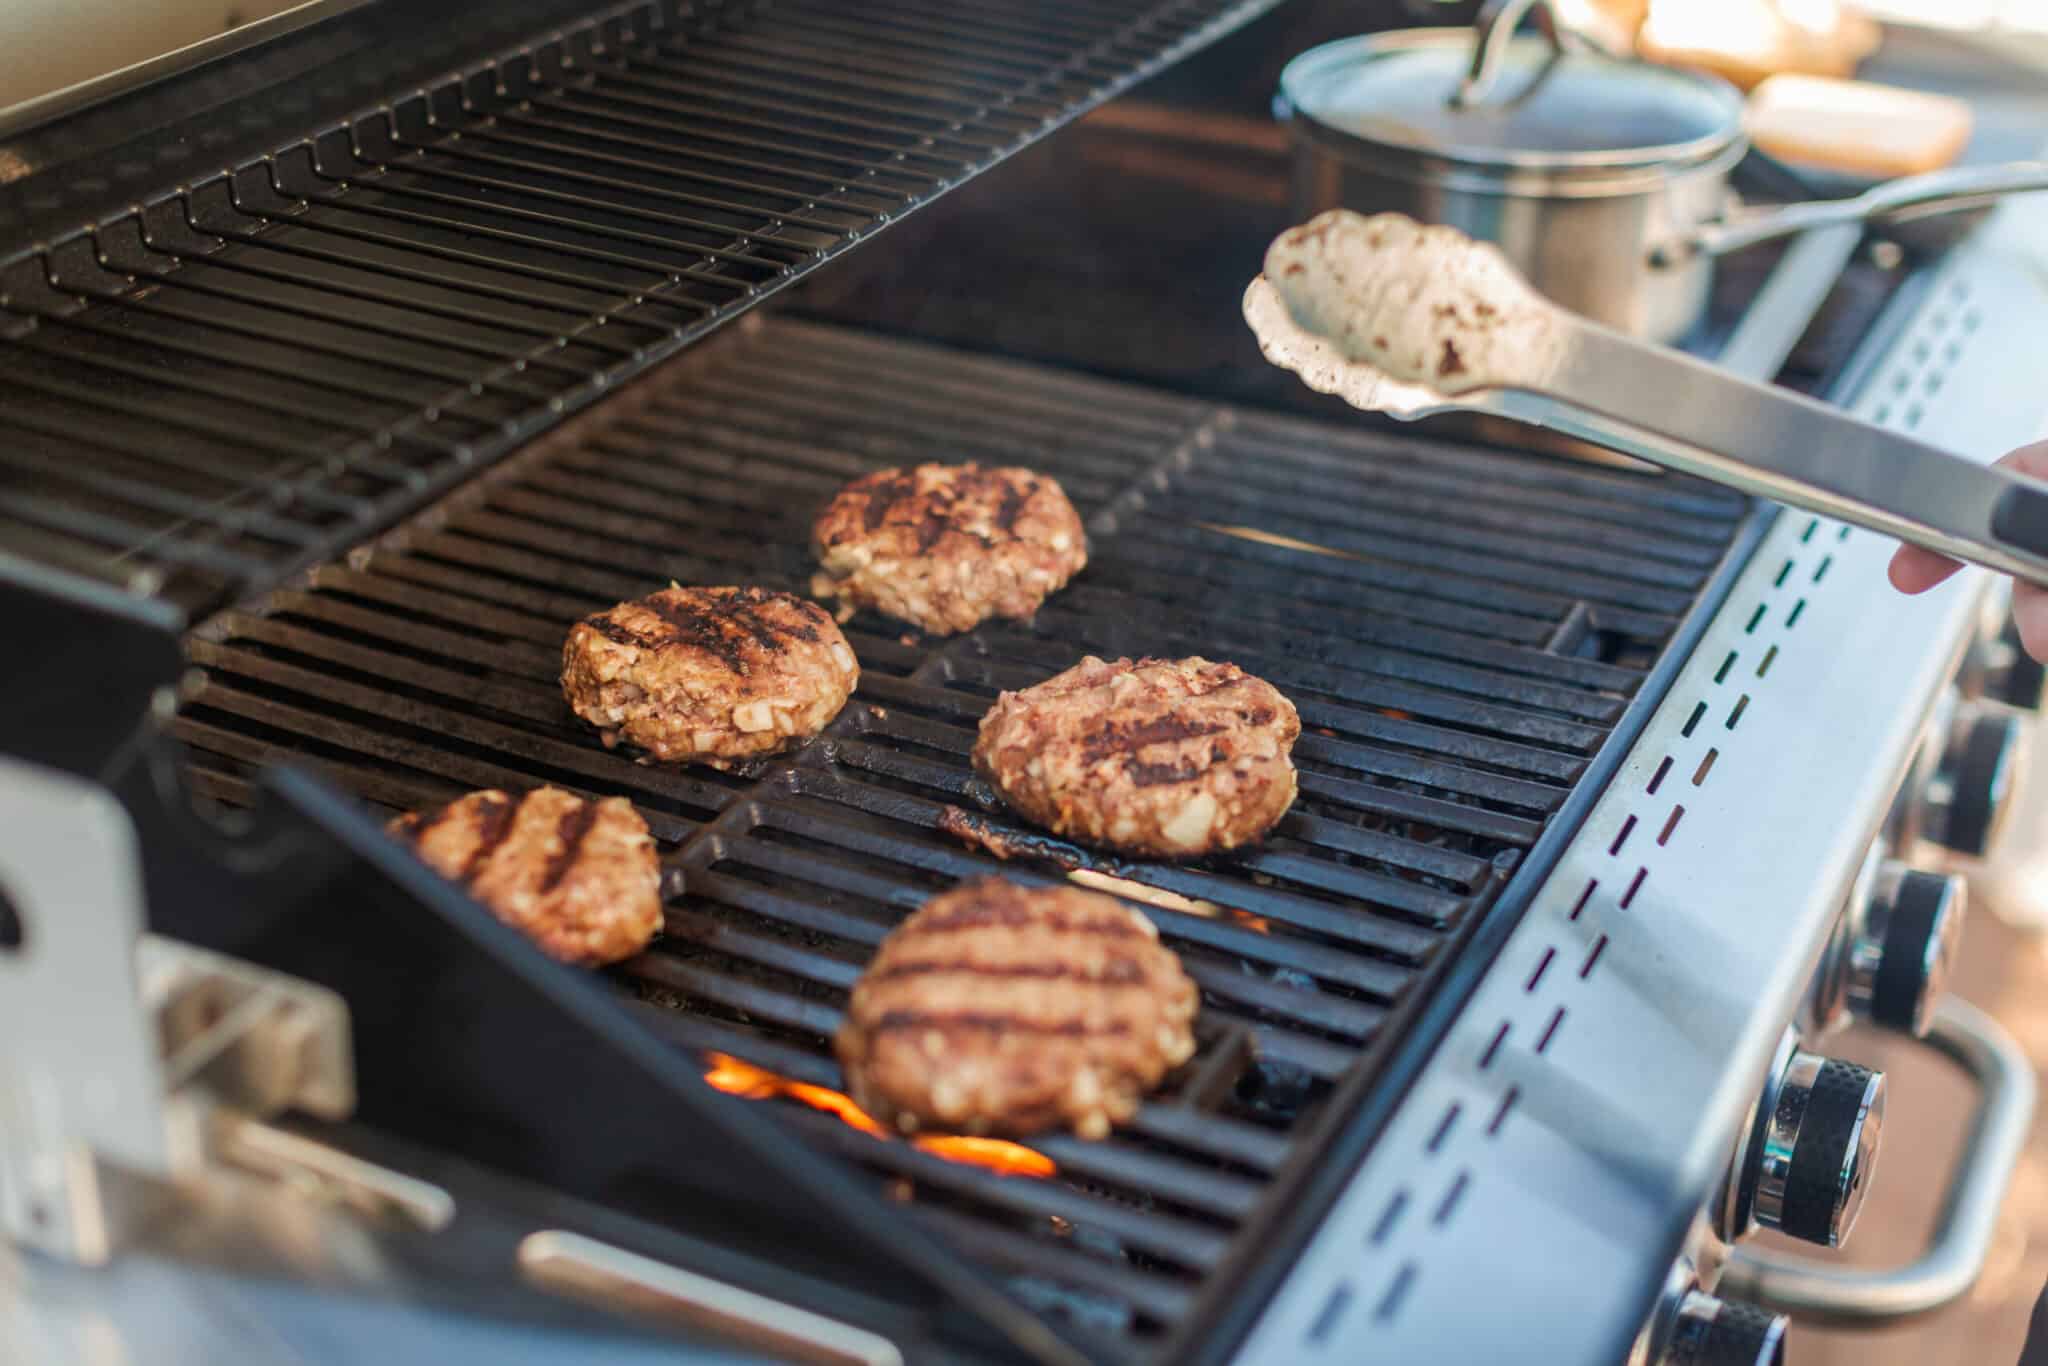 How to Cook Burgers on Gas Grill